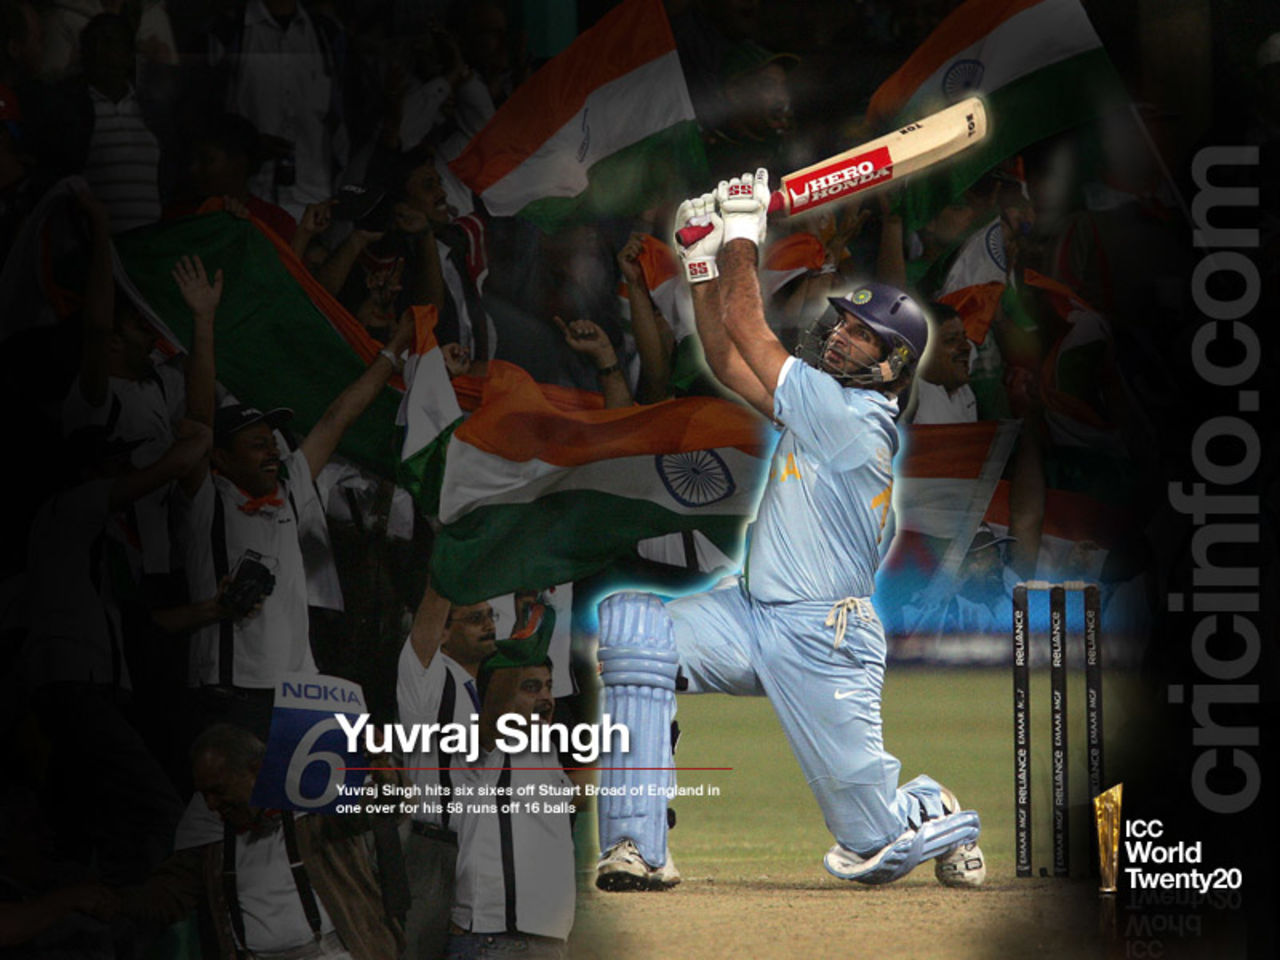 Yuvraj on his way to hit six sixes in an over